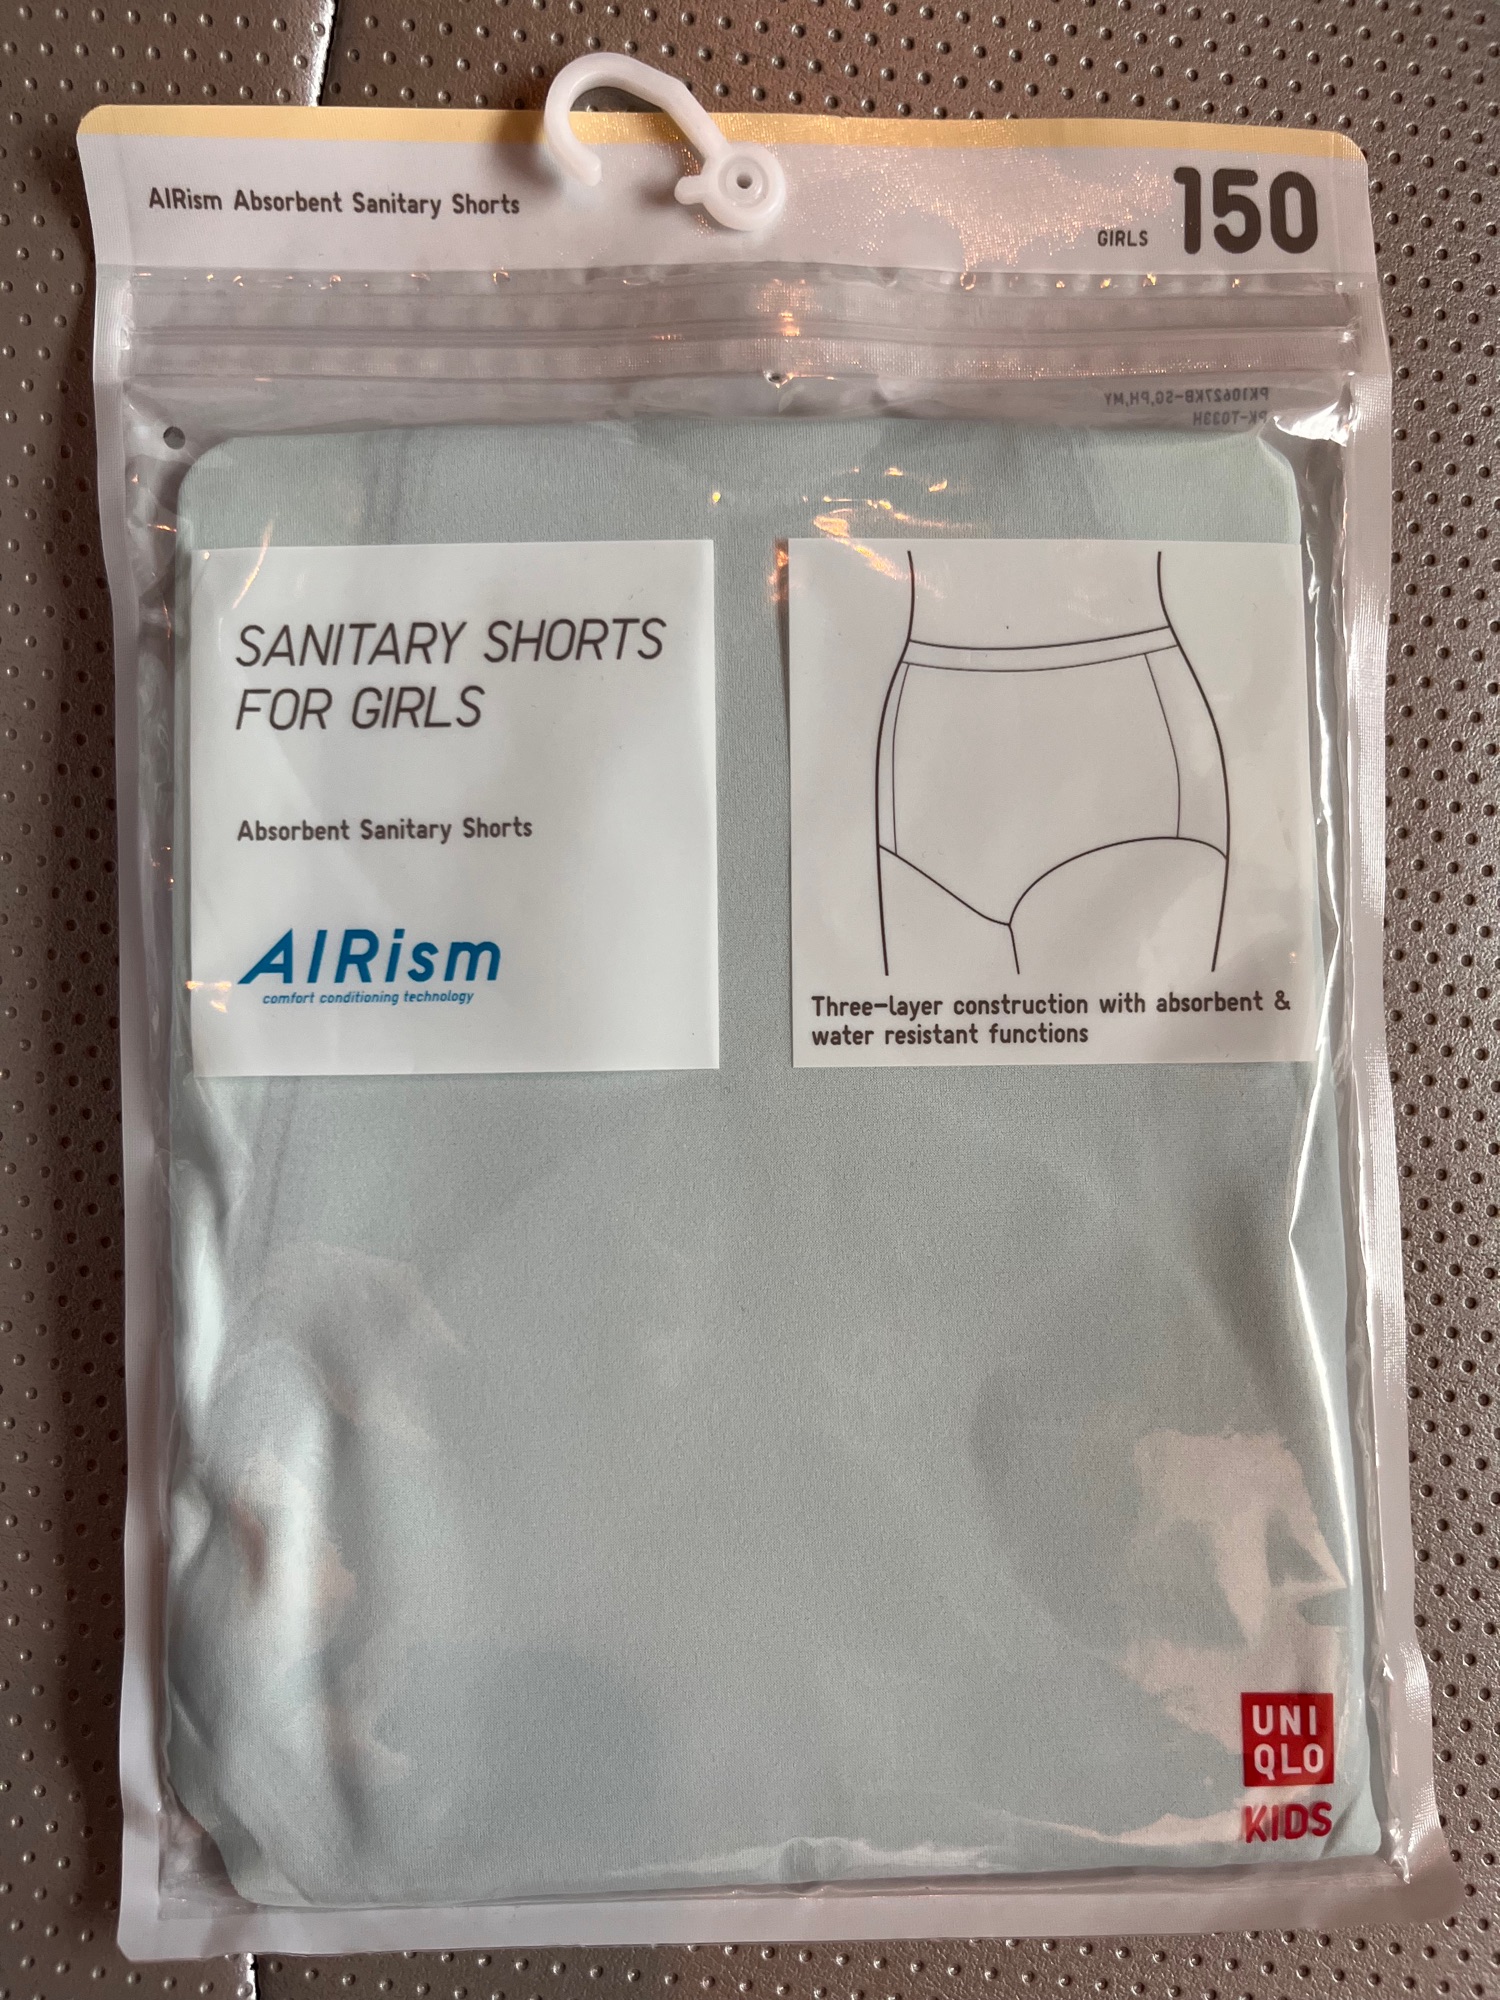 Still feeling skeptical about the AIRism Absorbent Sanitary Shorts